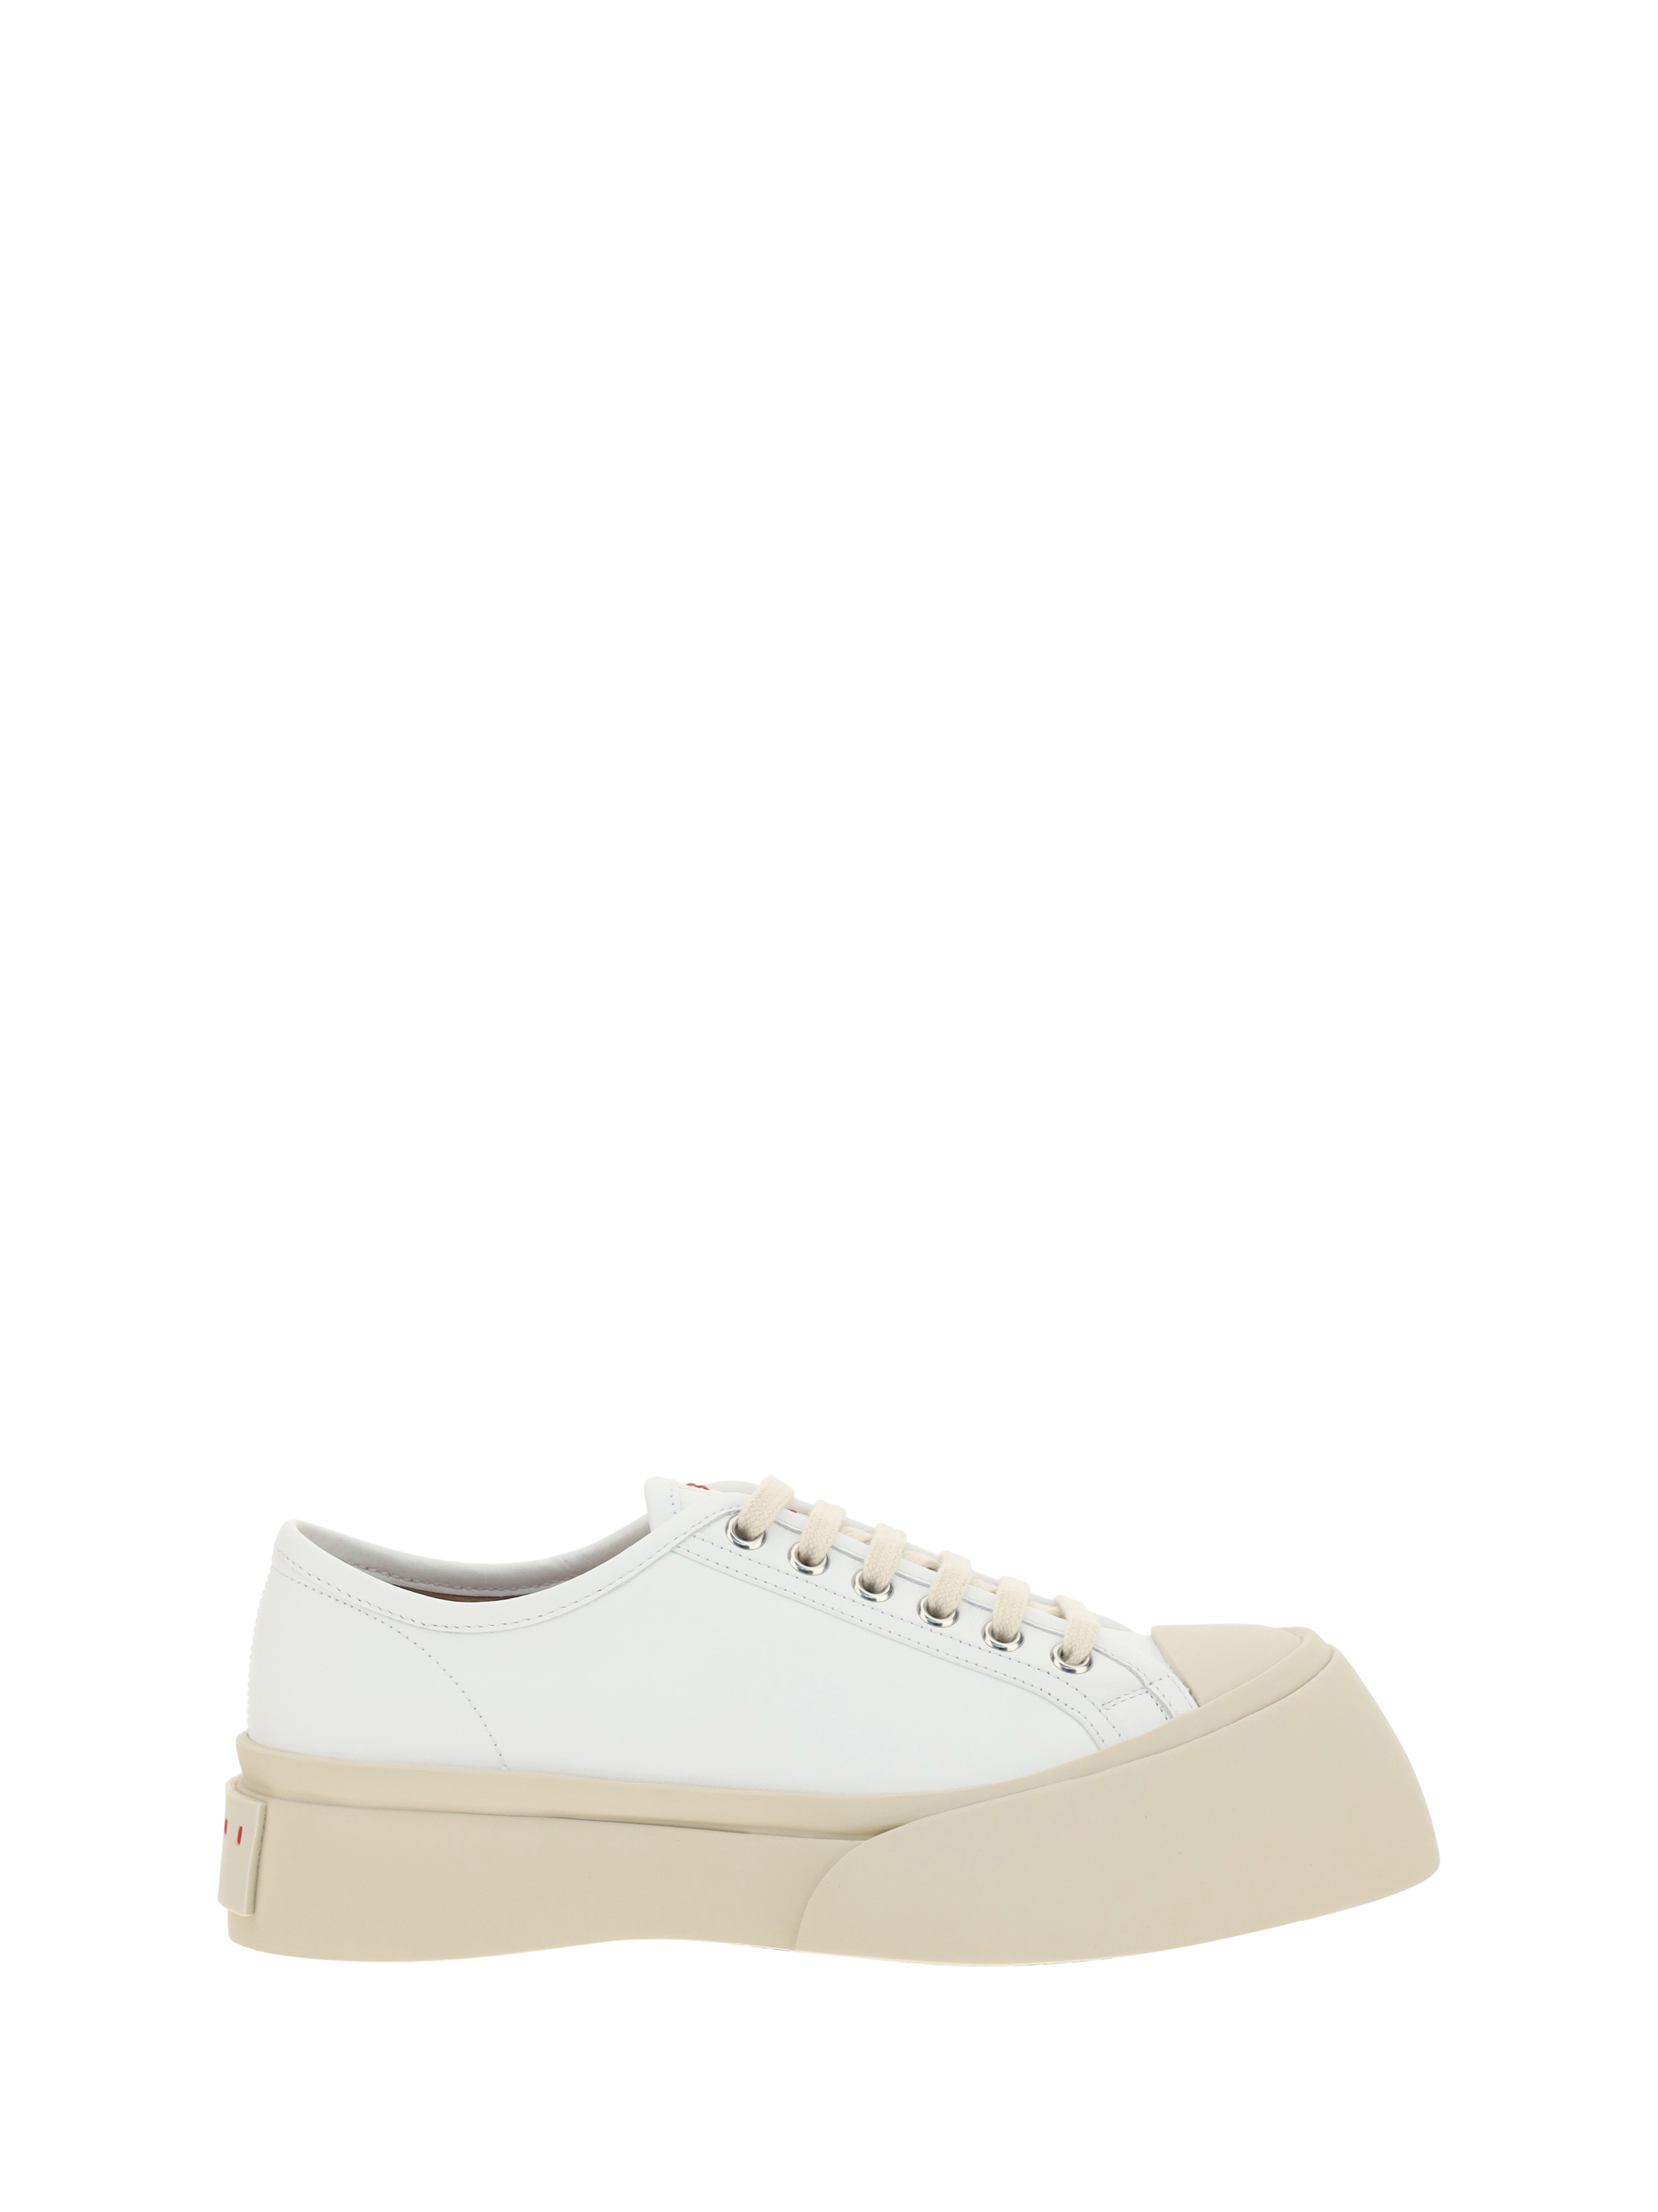 Marni Pablo Leather Sneakers In 00w01